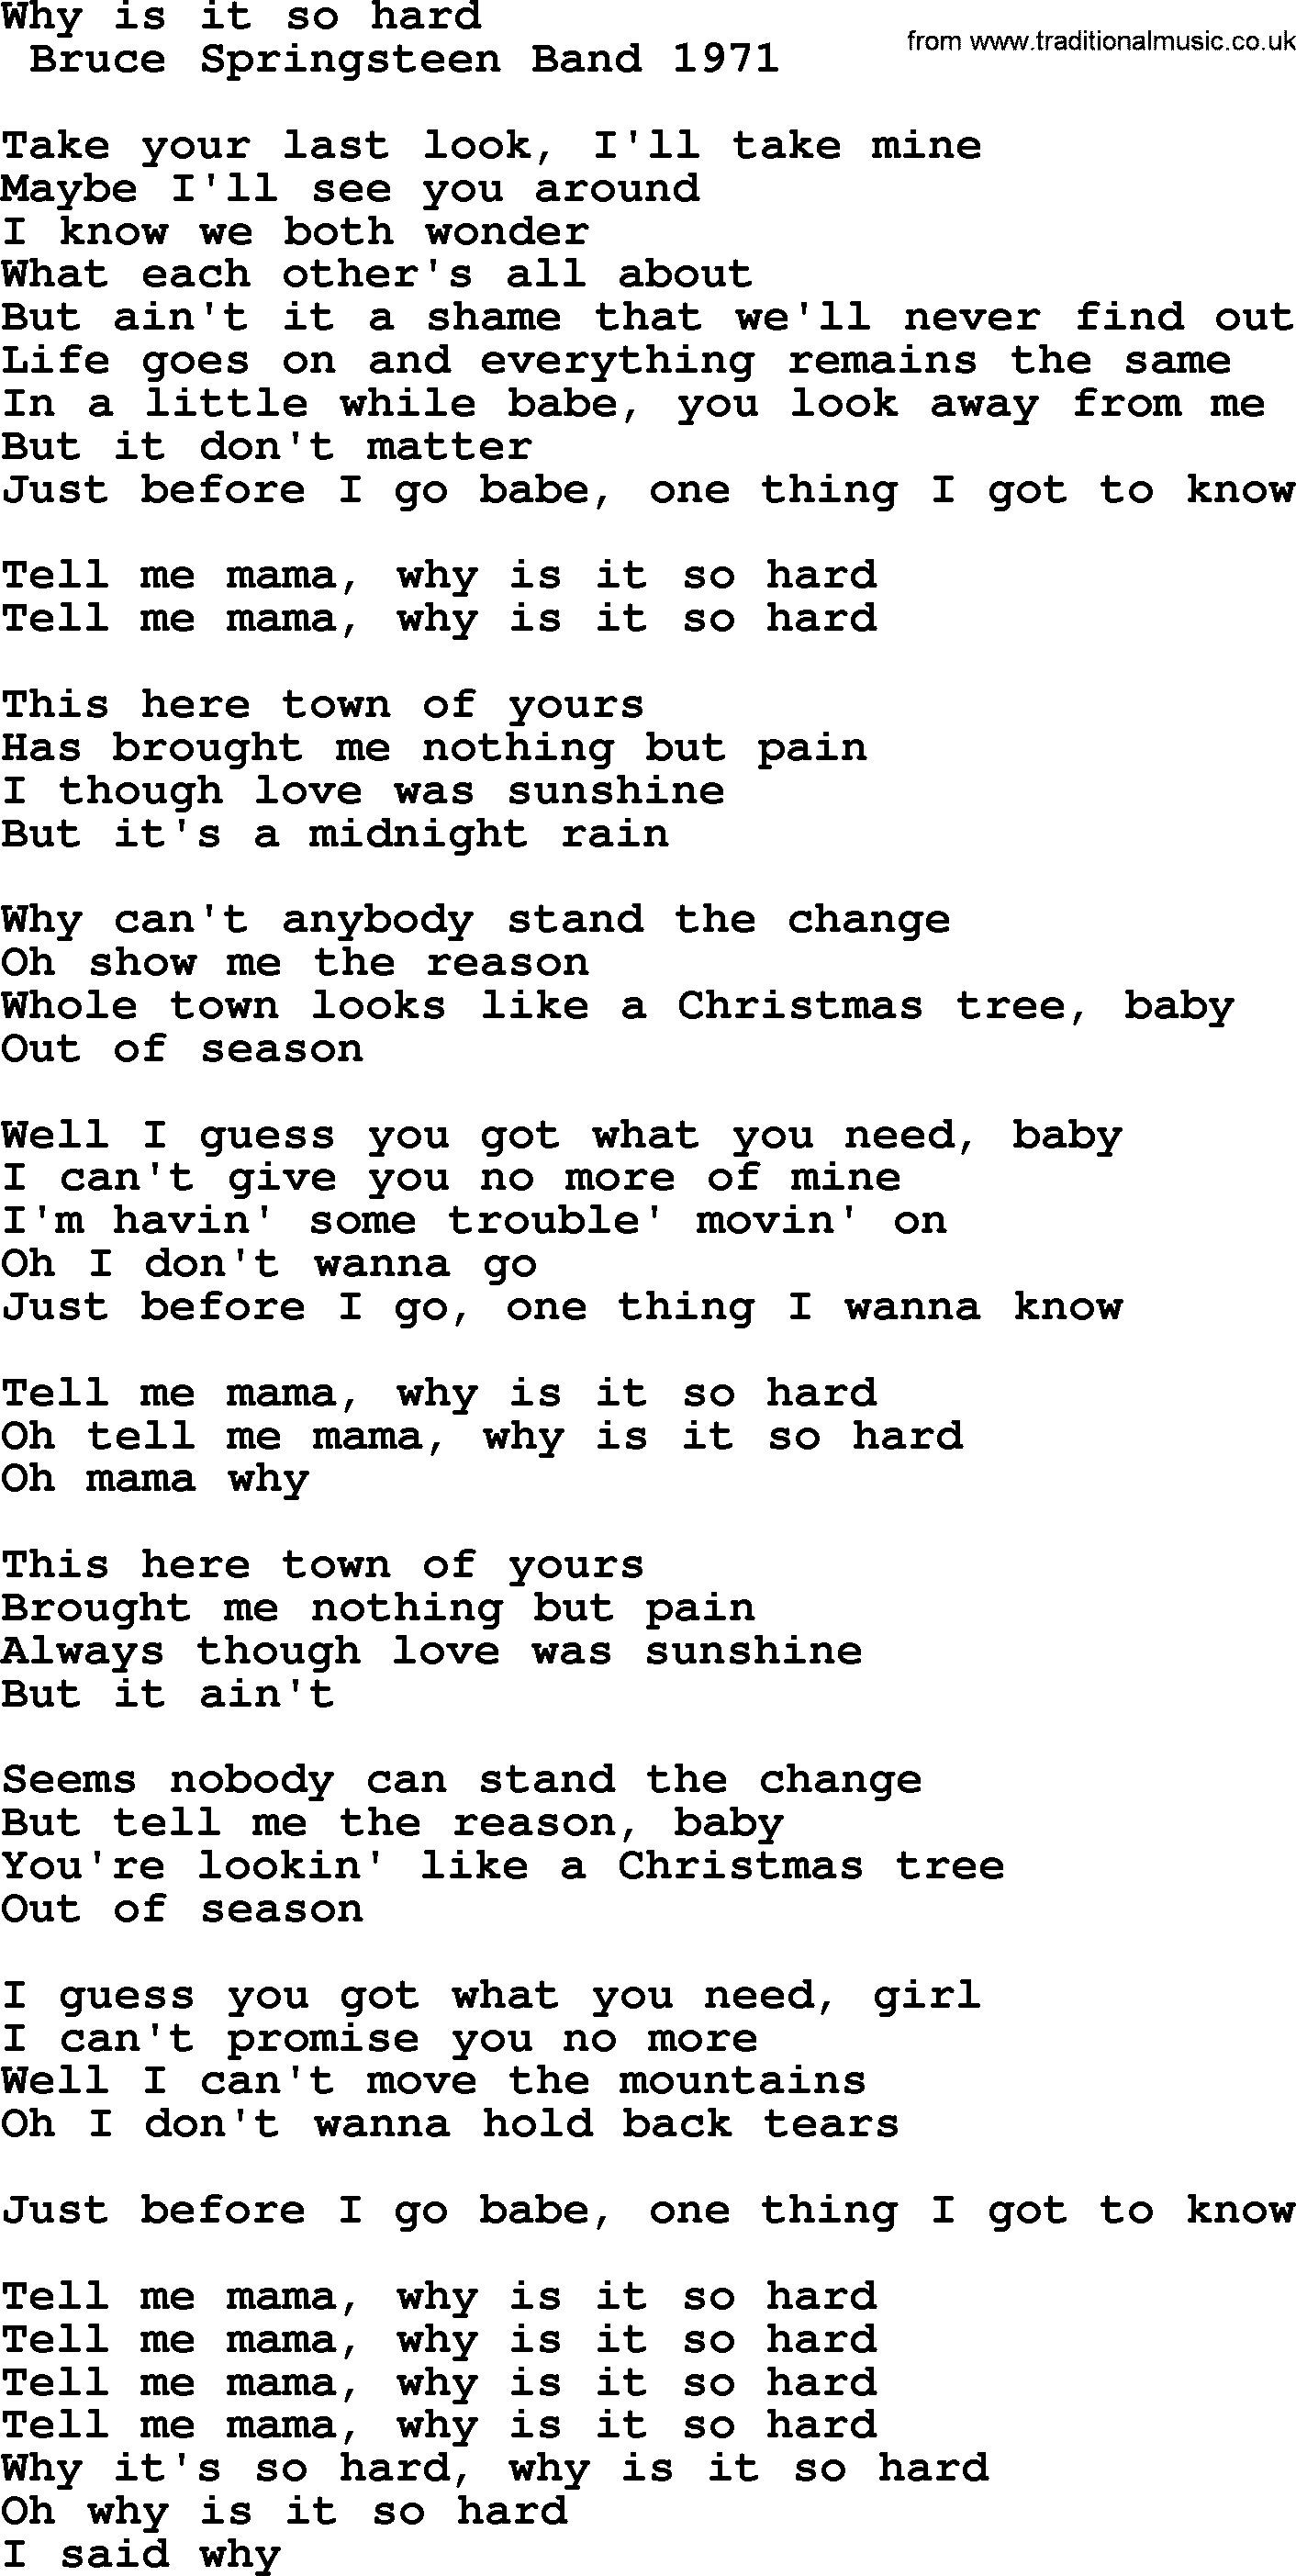 Bruce Springsteen song: Why Is It So Hard lyrics